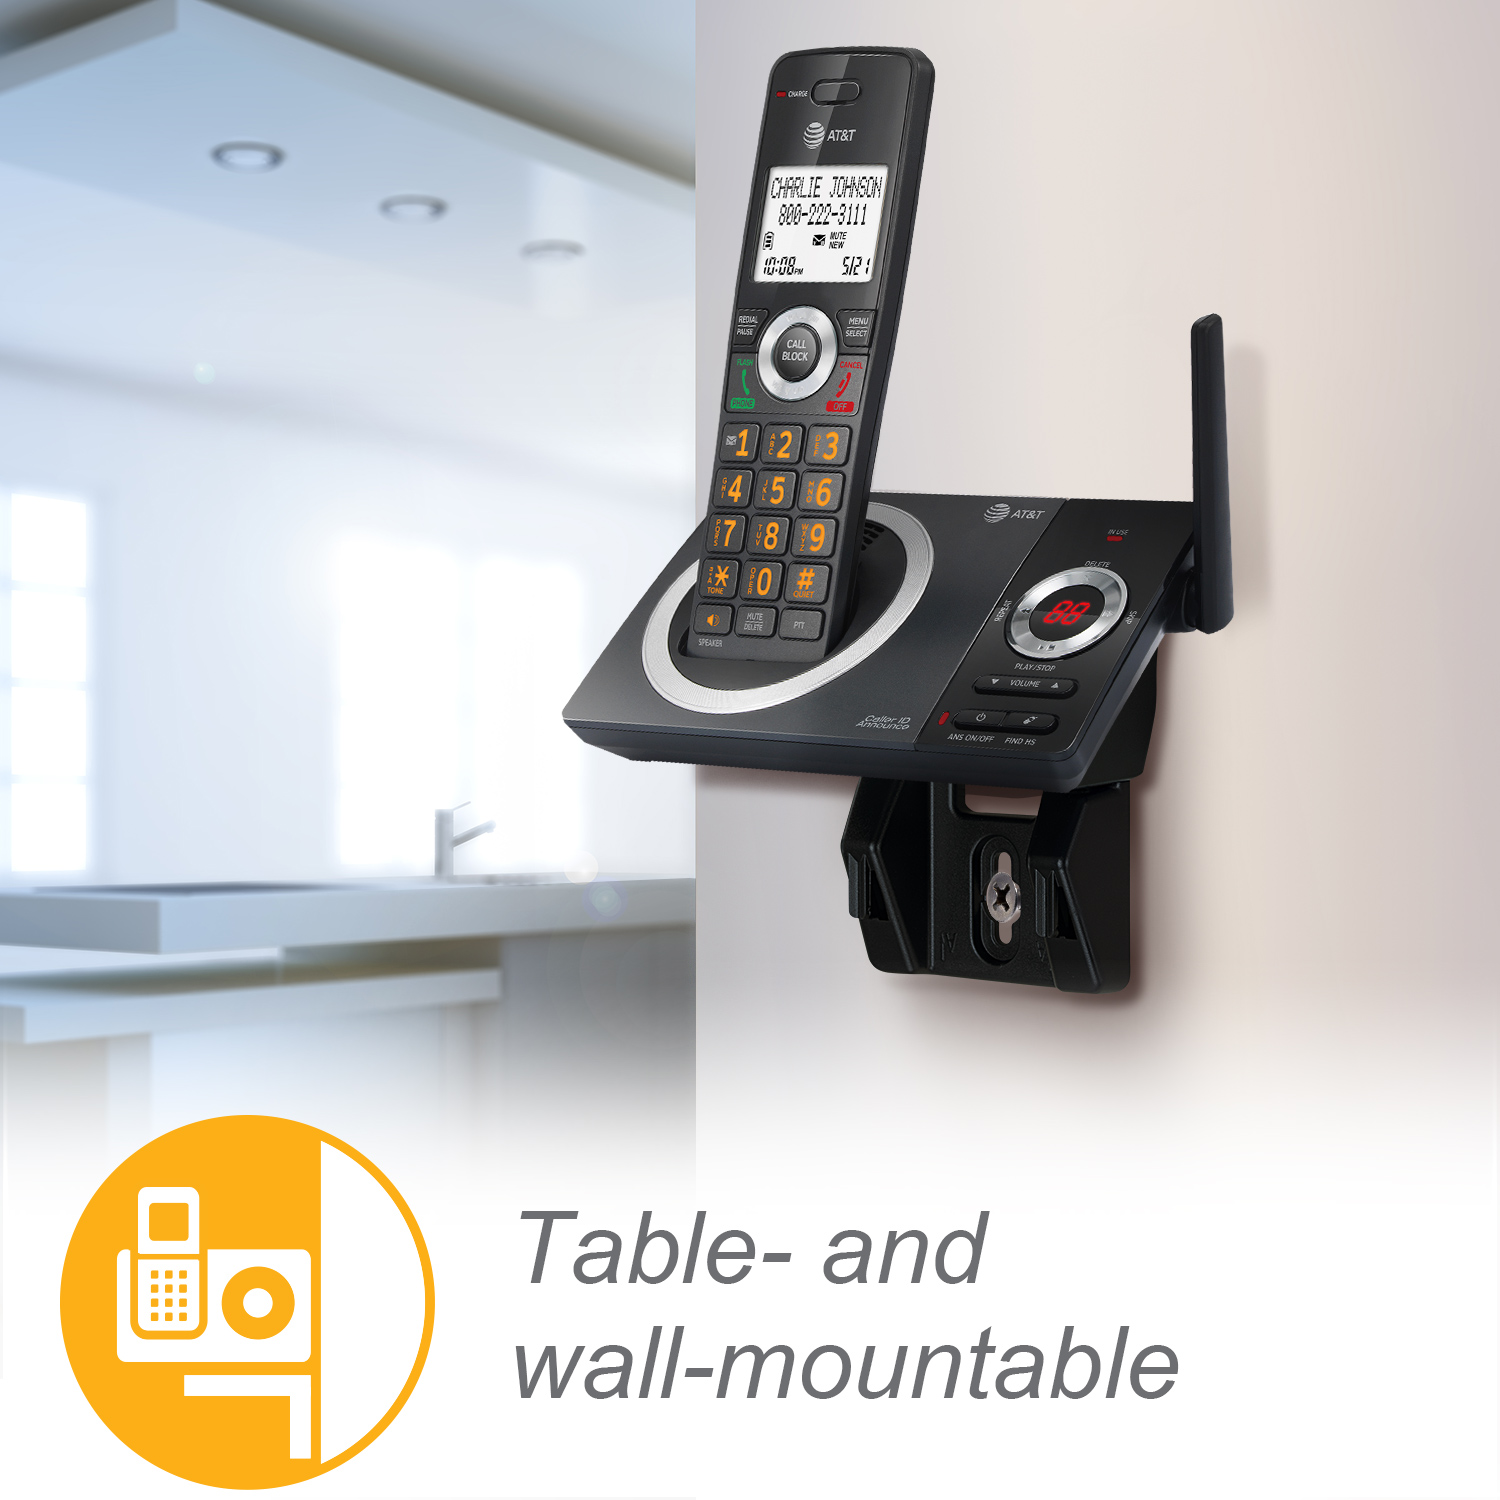 2-Handset Expandable Cordless Phone with Unsurpassed Range, Smart Call Blocker and Answering System - view 12